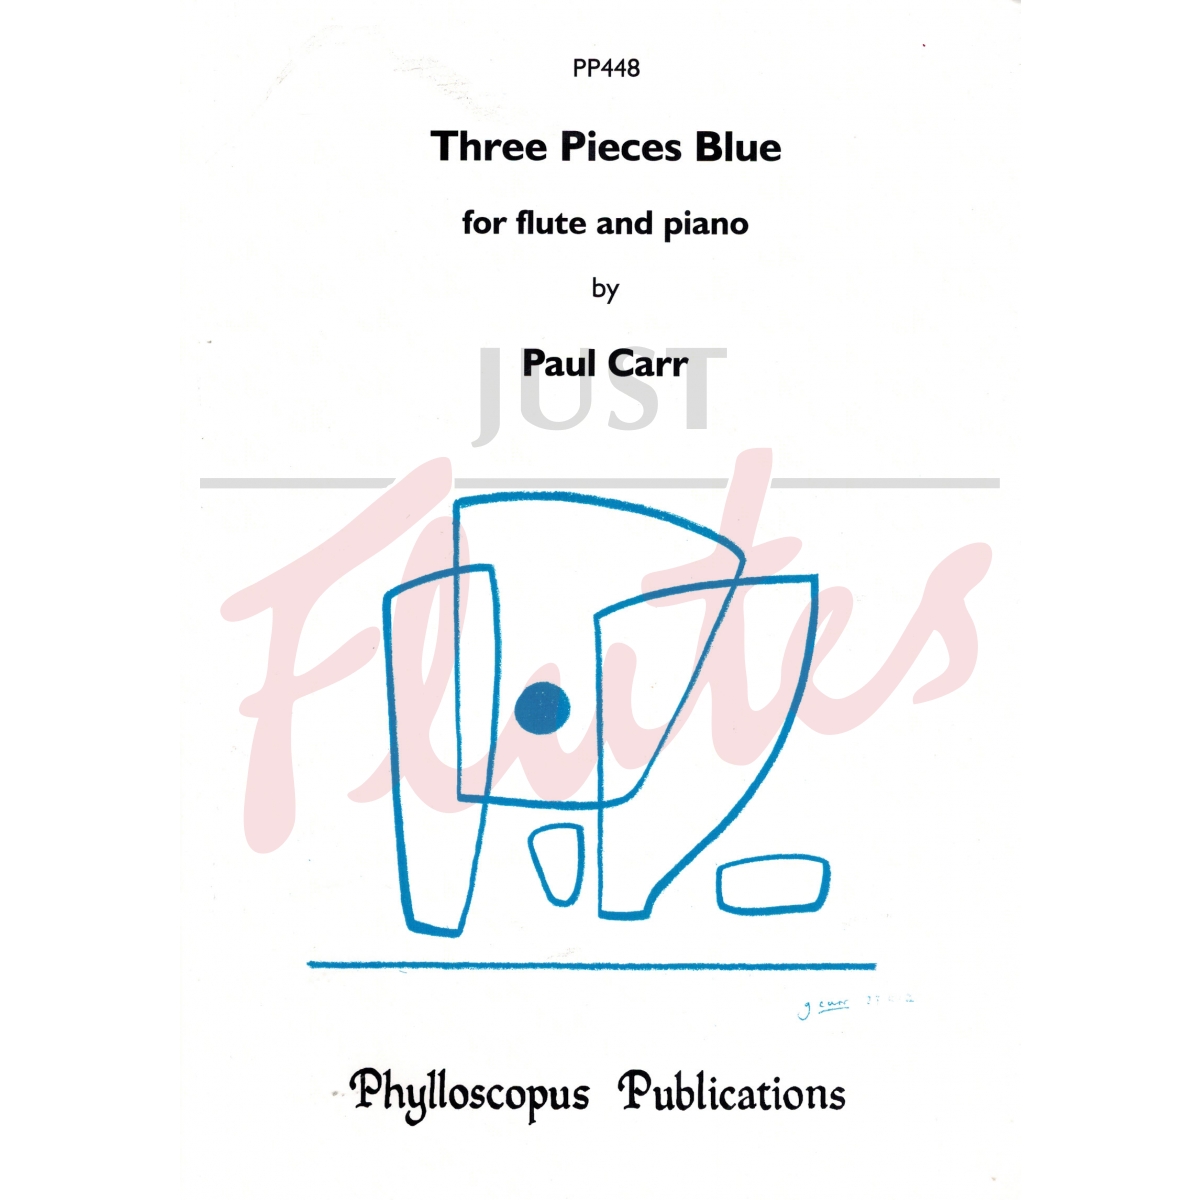 Three Pieces Blue for Flute and Piano